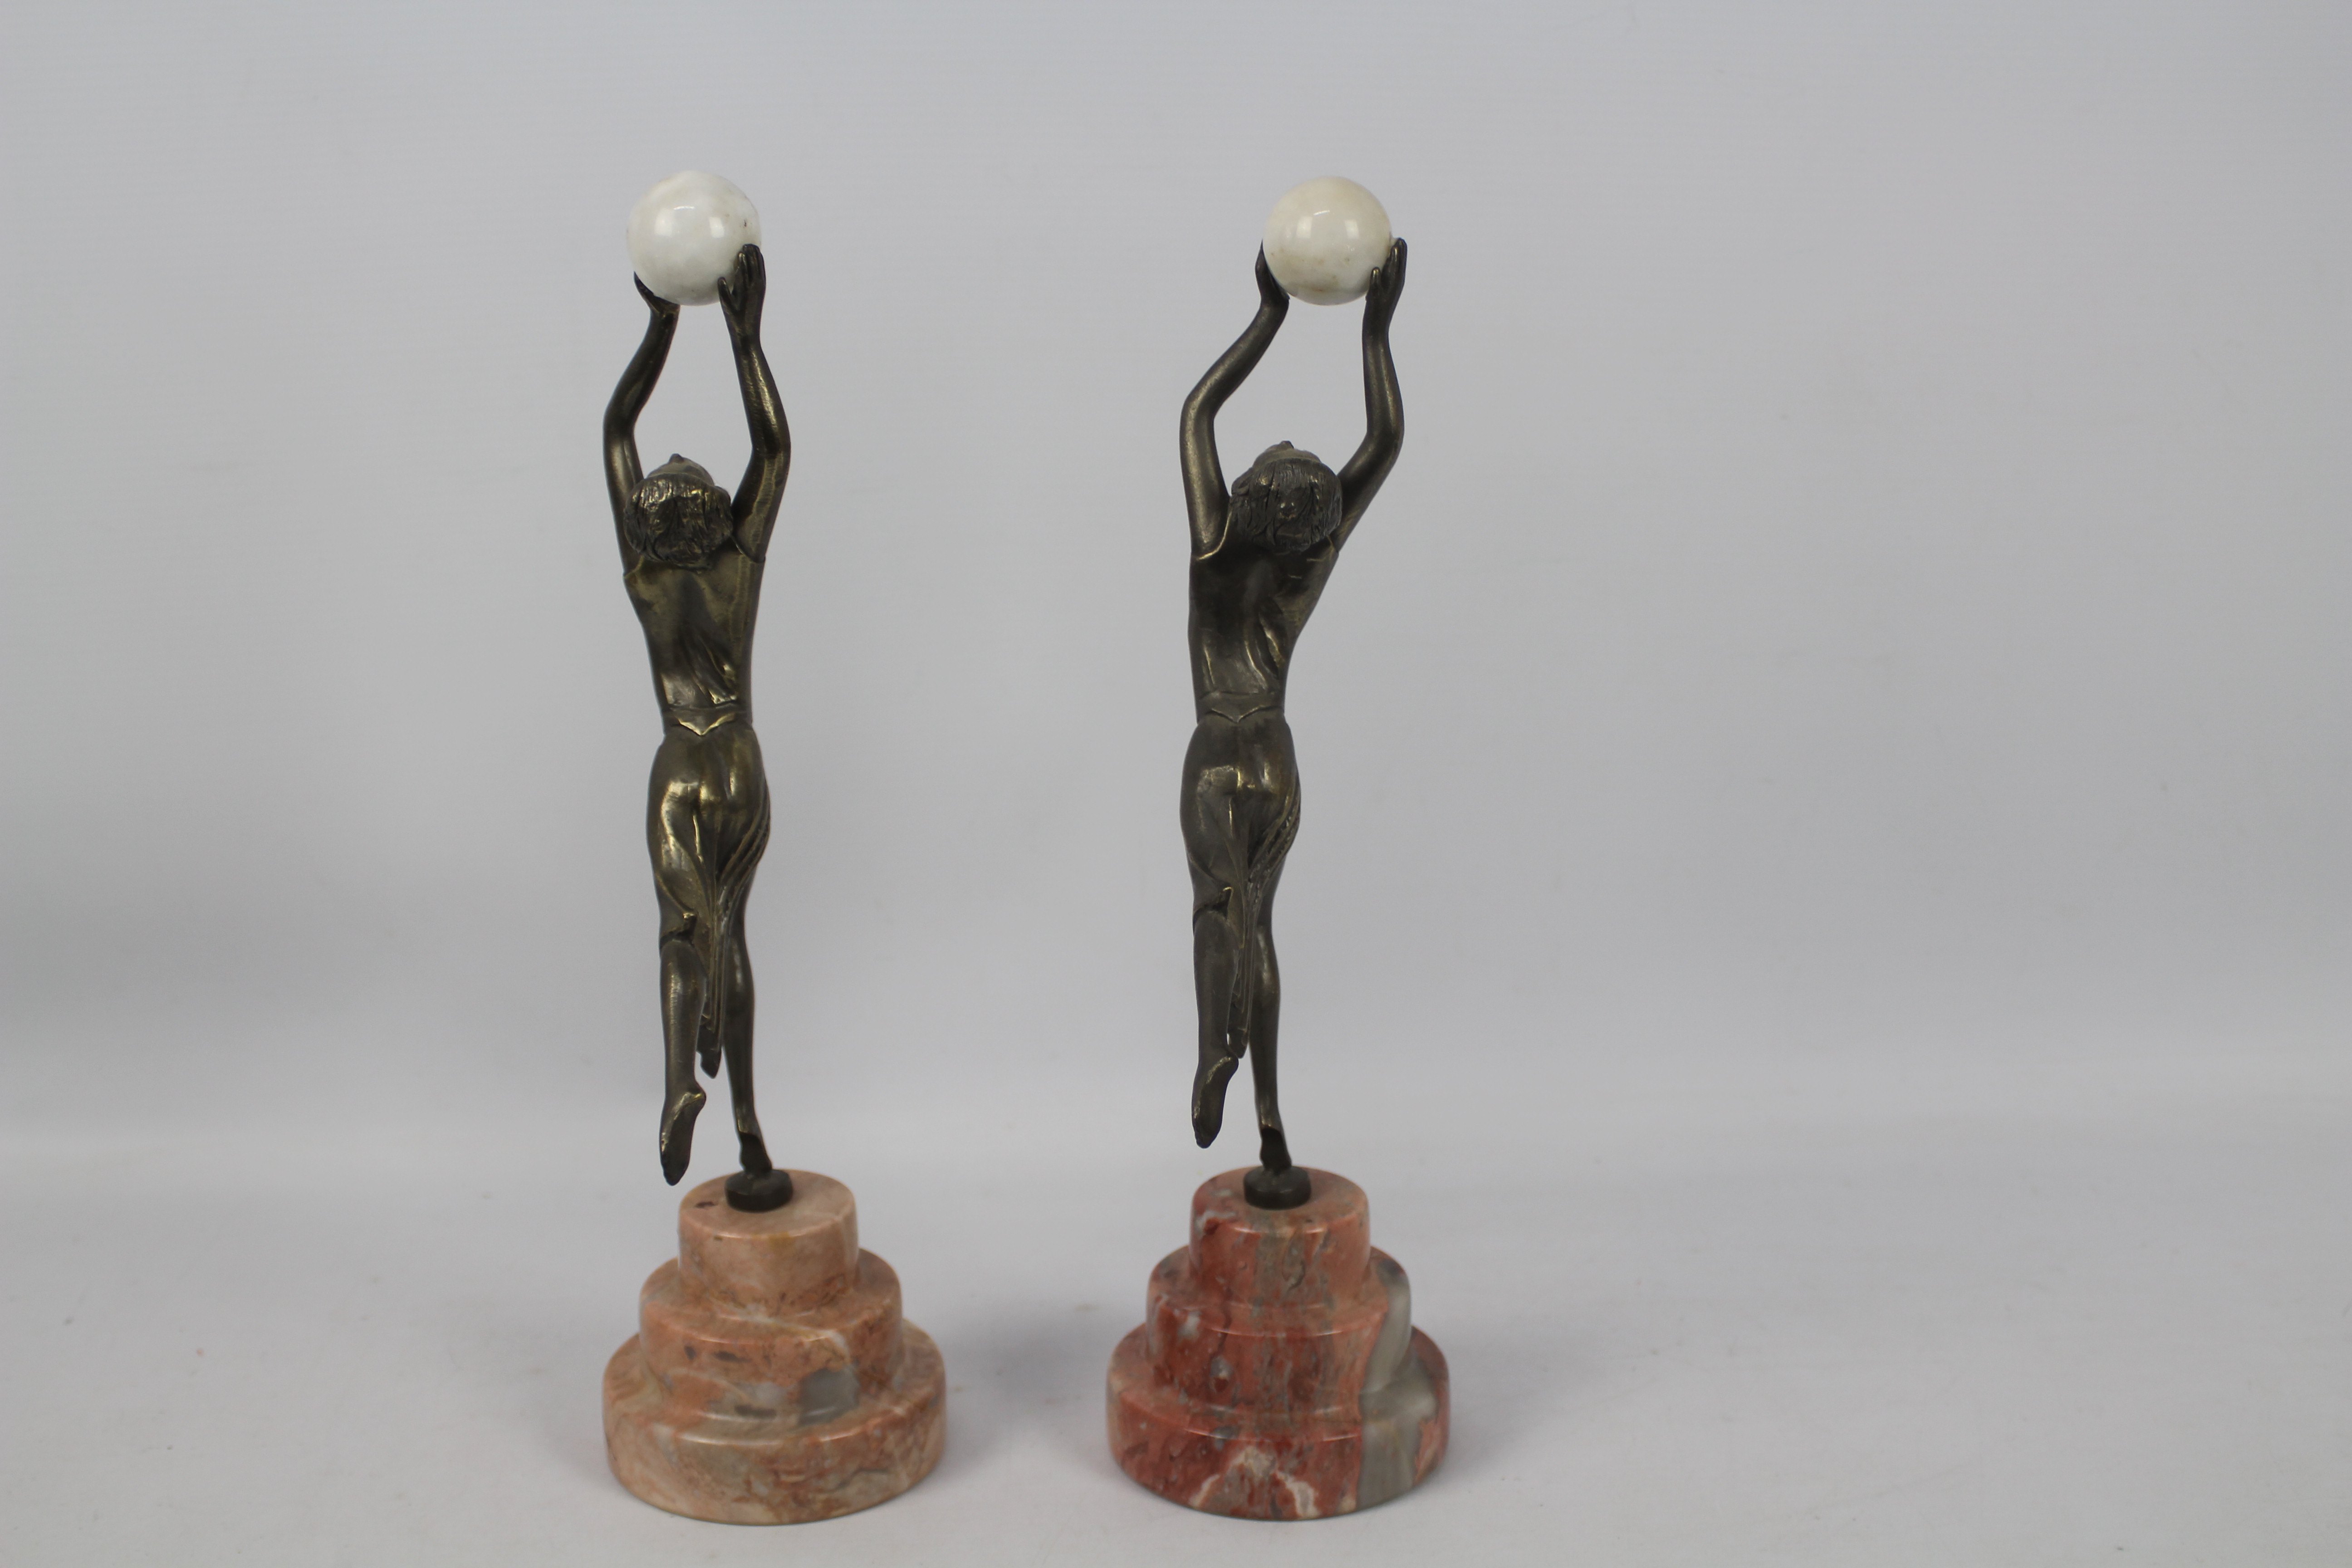 A pair of Art Deco style sculptures modelled as female figures holding aloft spheres, - Image 4 of 6